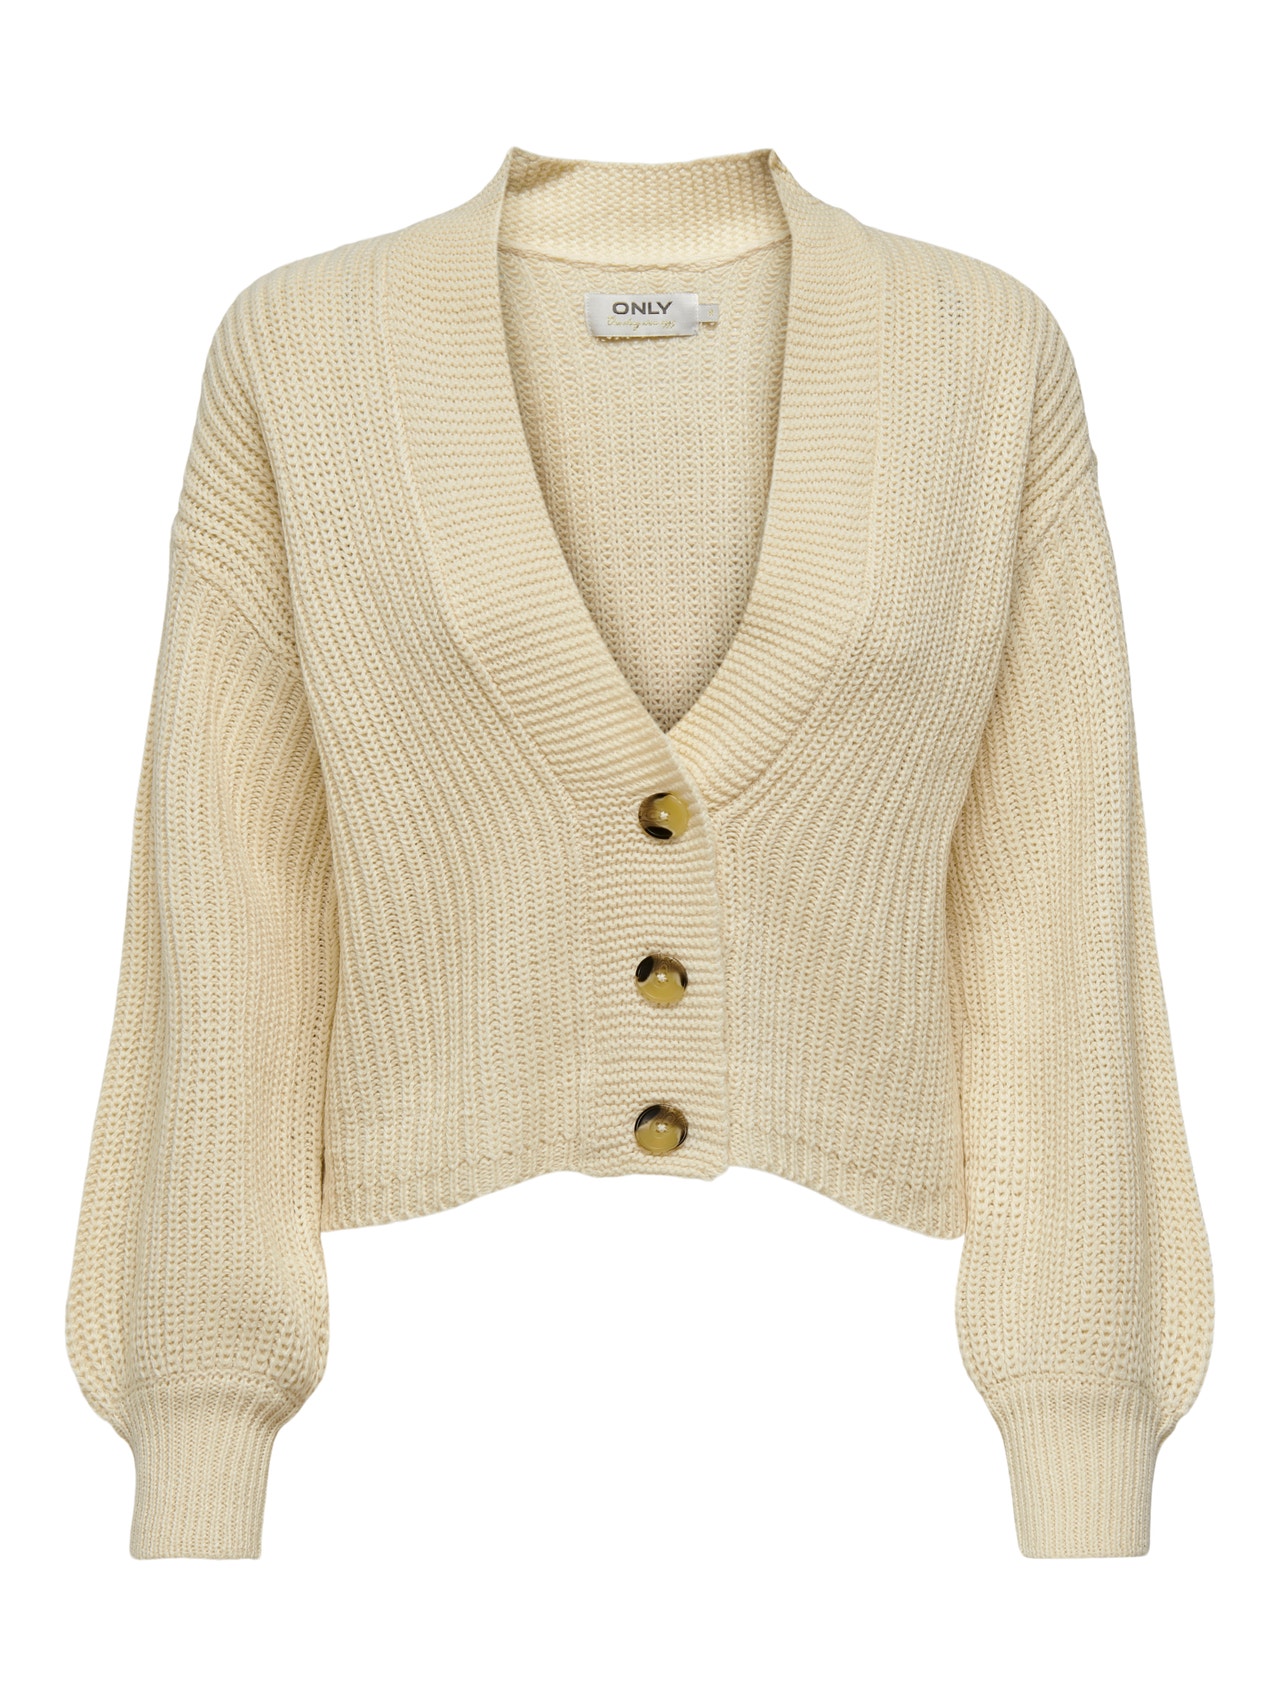 ONLY O-Neck Knit Cardigan -Oatmeal - 15252685